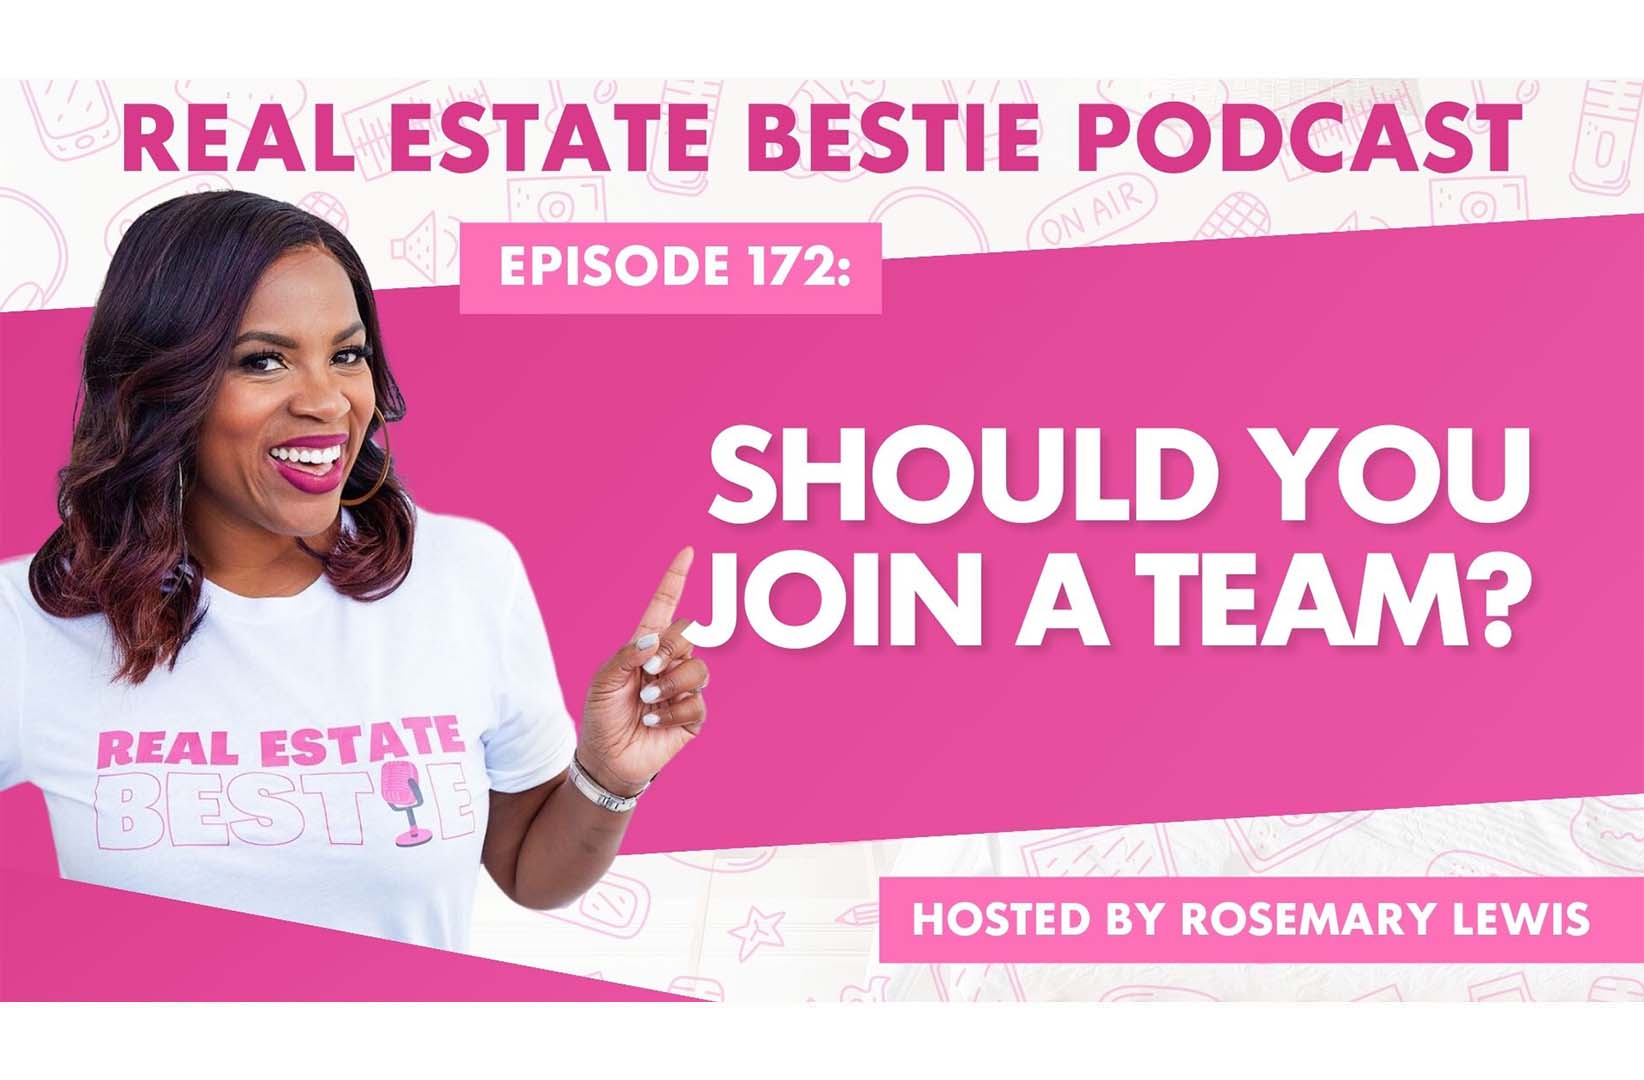 Should You Join a Team? - Real Estate Bestie Podcast - Rosemary Lewis